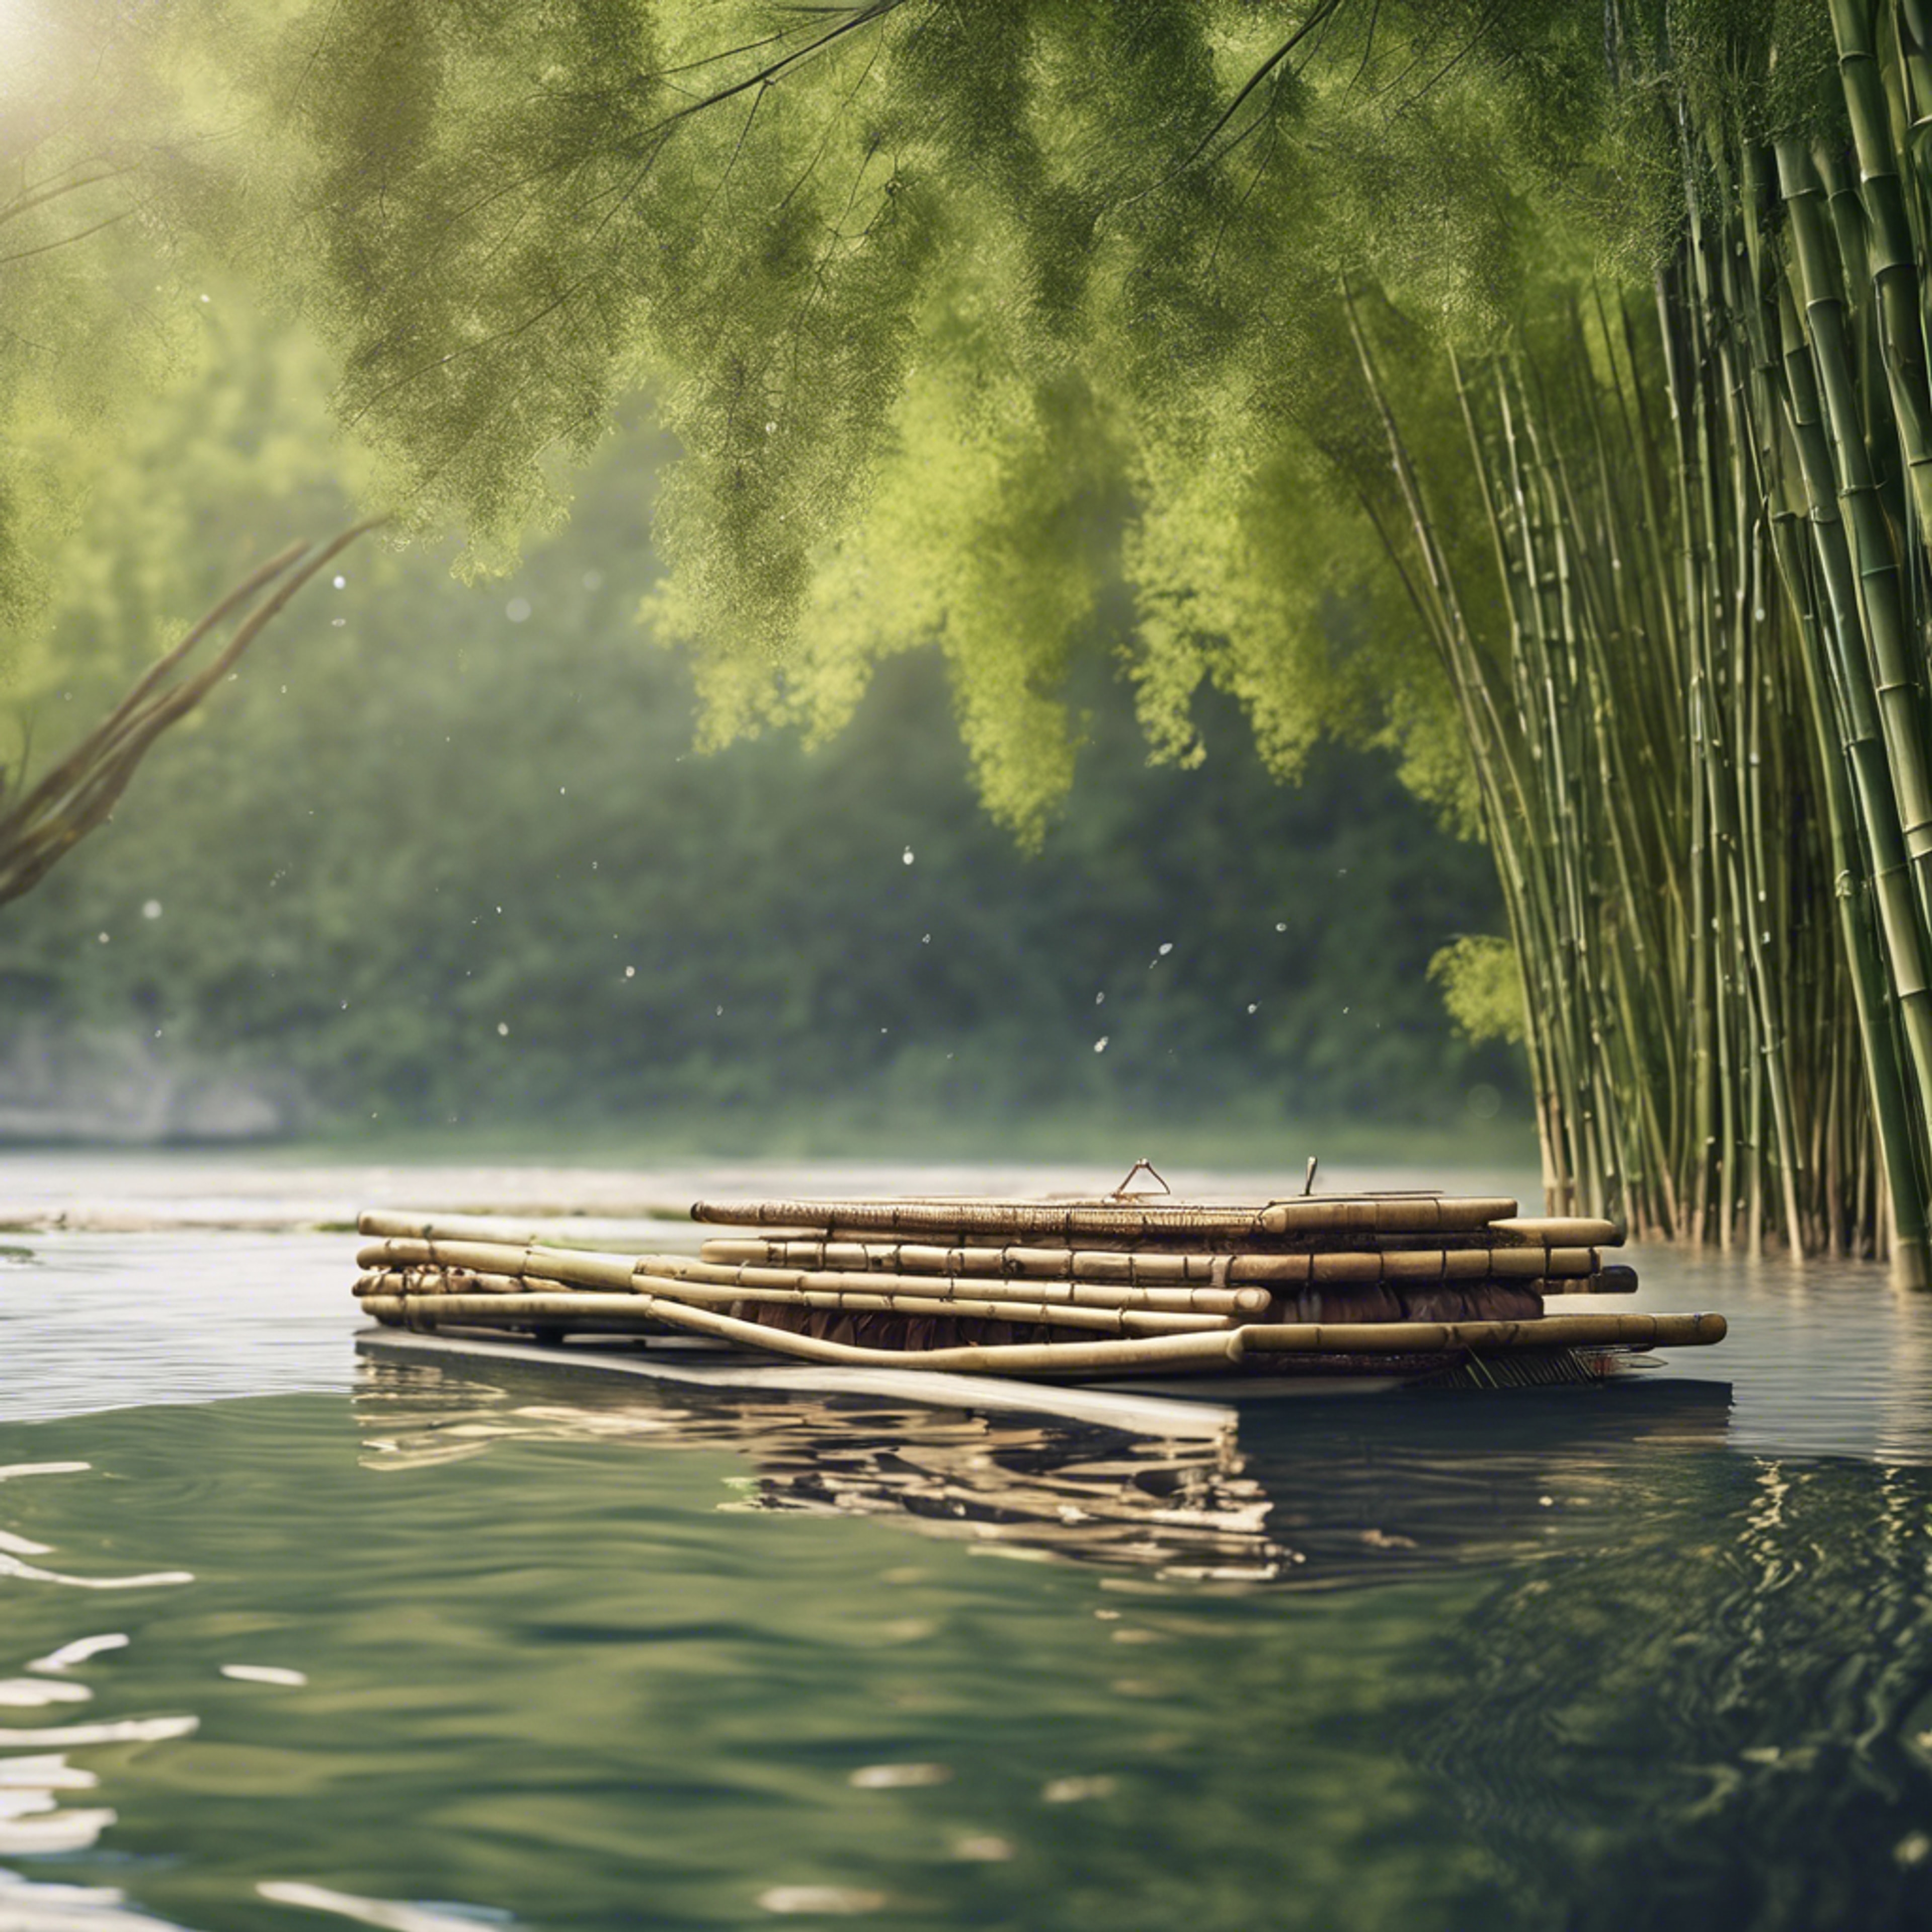 A bamboo raft floating on a calm river壁紙[2a6d07907c1745649cae]